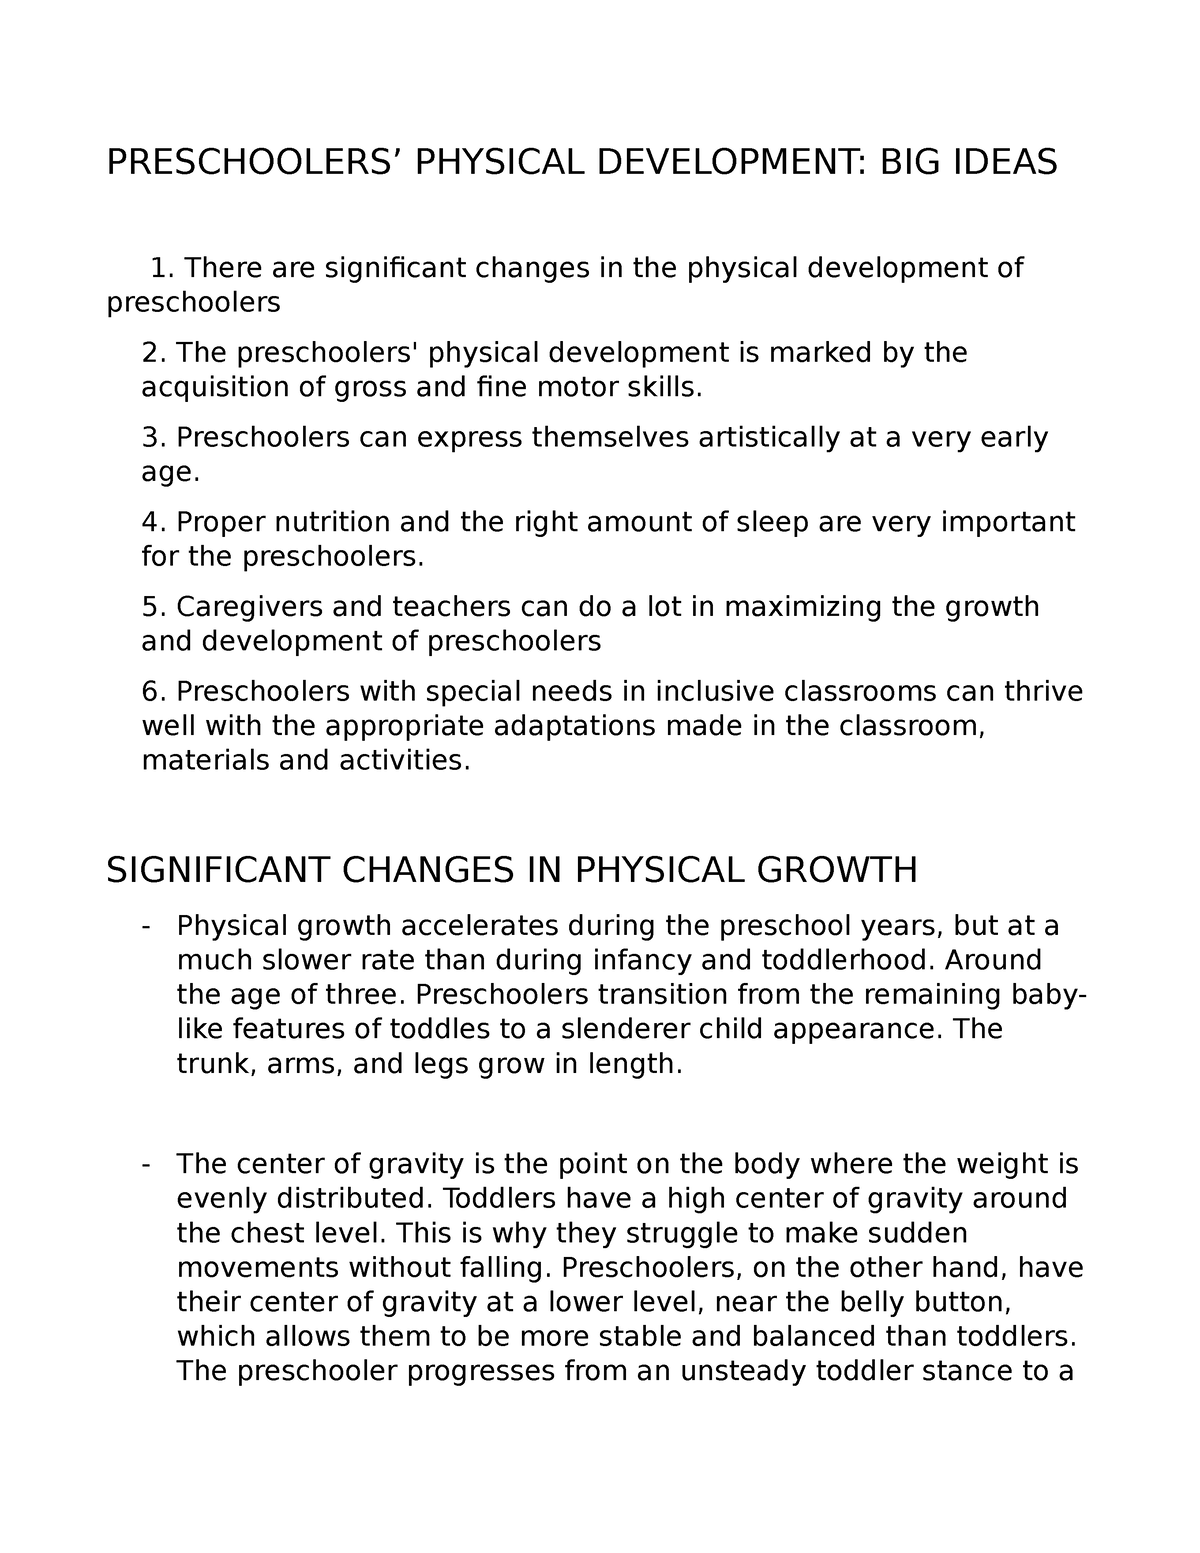 essay about physical development of preschoolers